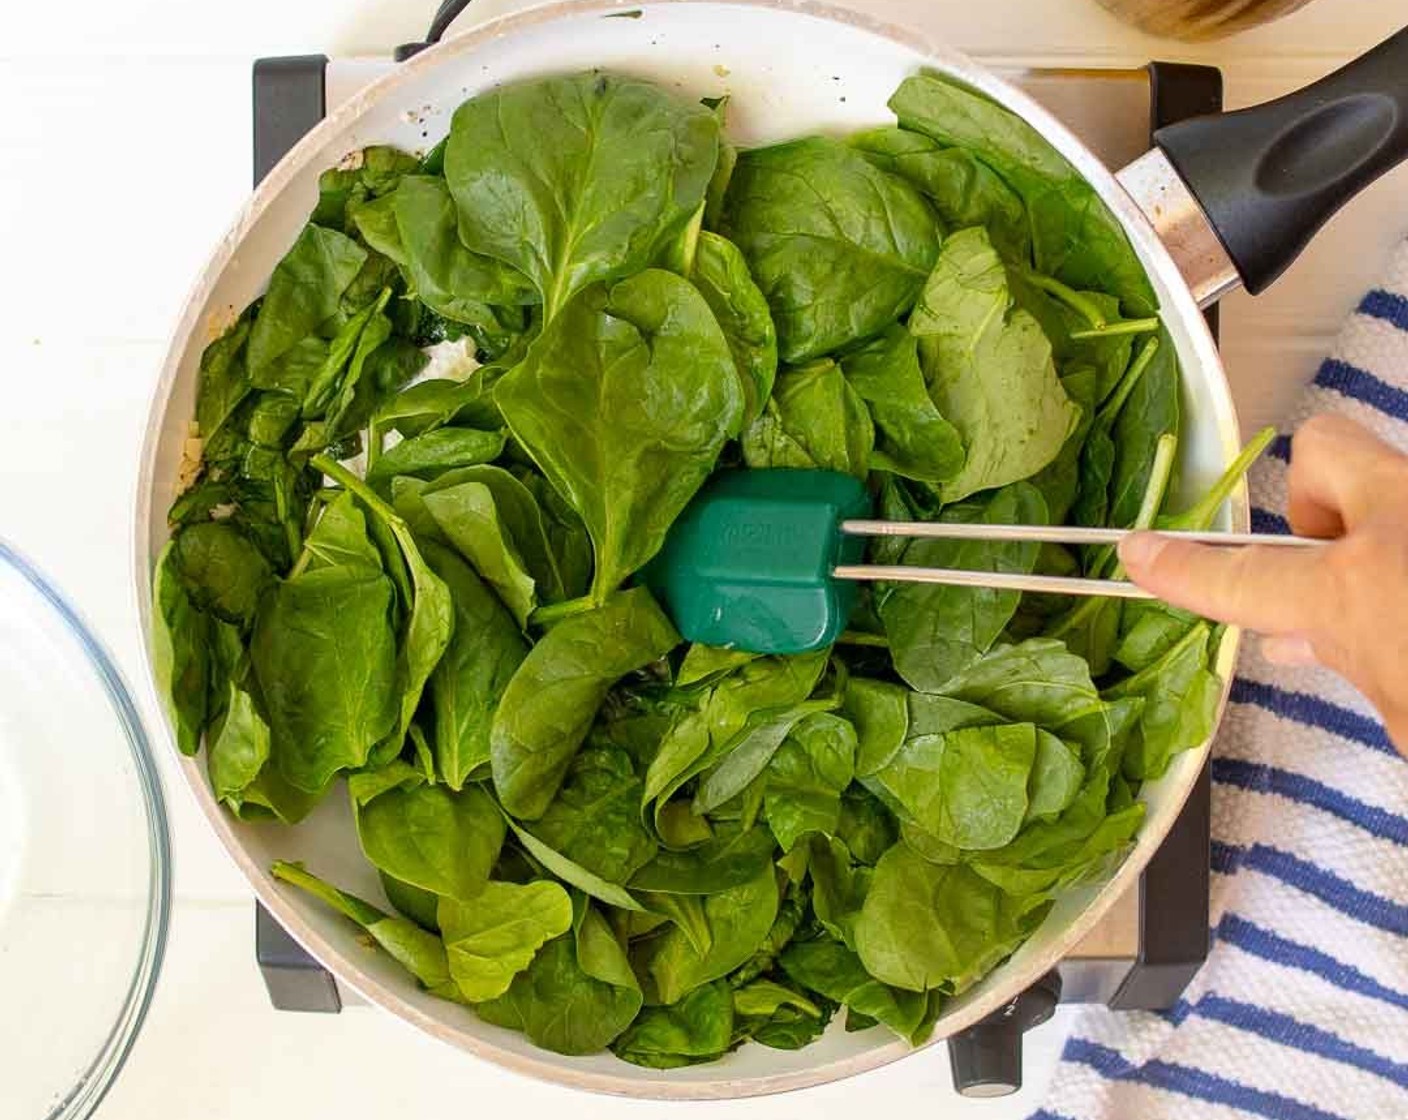 step 2 In a large nonstick skillet heat Olive Oil (1/2 Tbsp) over medium heat. Add Garlic (3 cloves) and saute for 1 minute. Add half of Fresh Baby Spinach (7 1/2 cups), Salt (1/4 tsp) and Ground Black Pepper (1/4 tsp). Stir until spinach is wilted. Continue to add handfuls of spinach until all spinach is wilted.